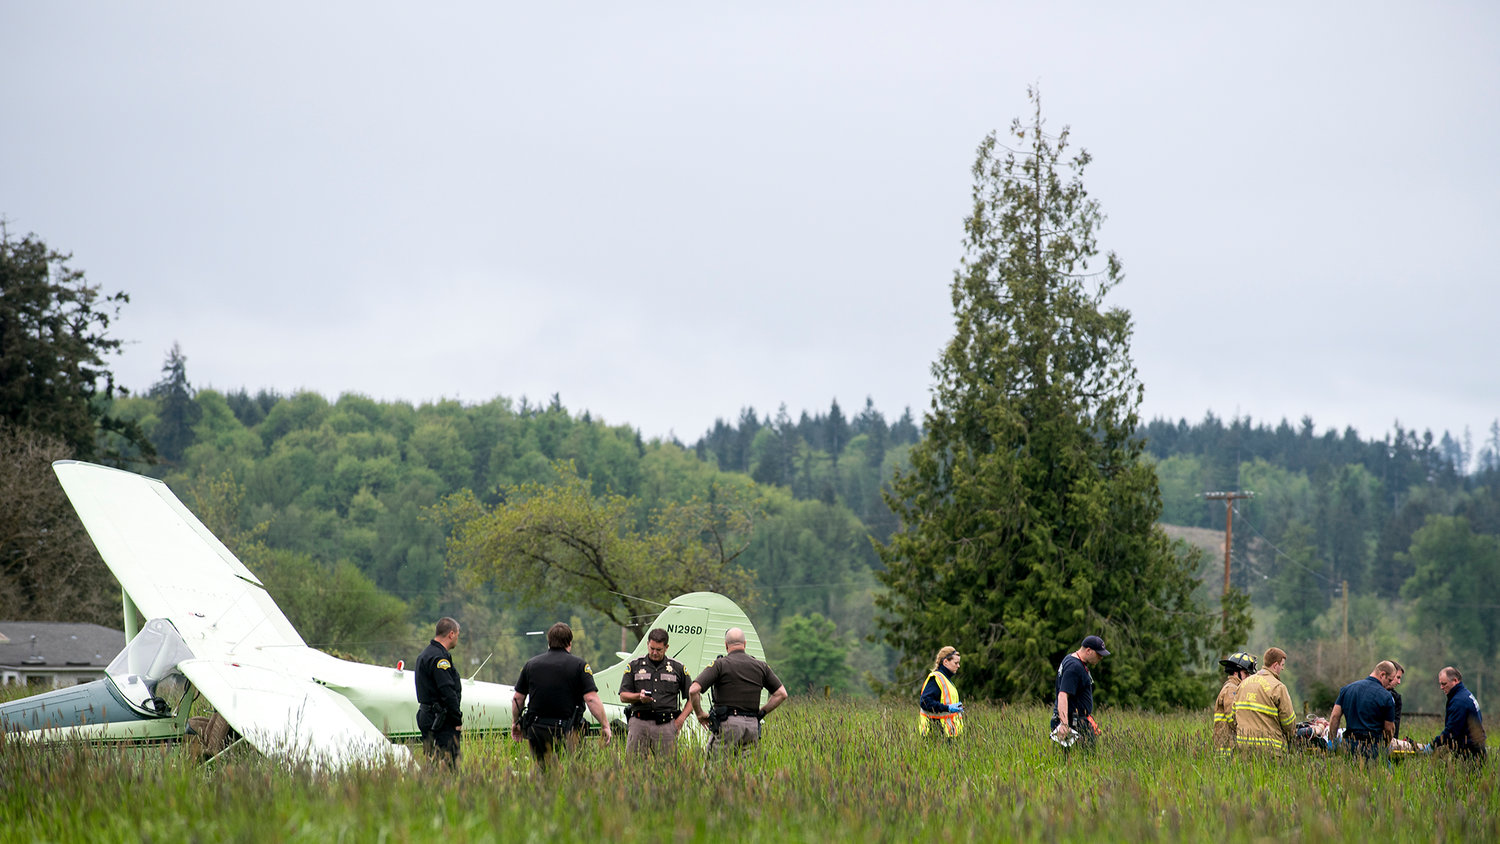 First responders remove a 73-year-old man from the plane that he crash landed in a field near Grand Mound on Tuesday afternoon.